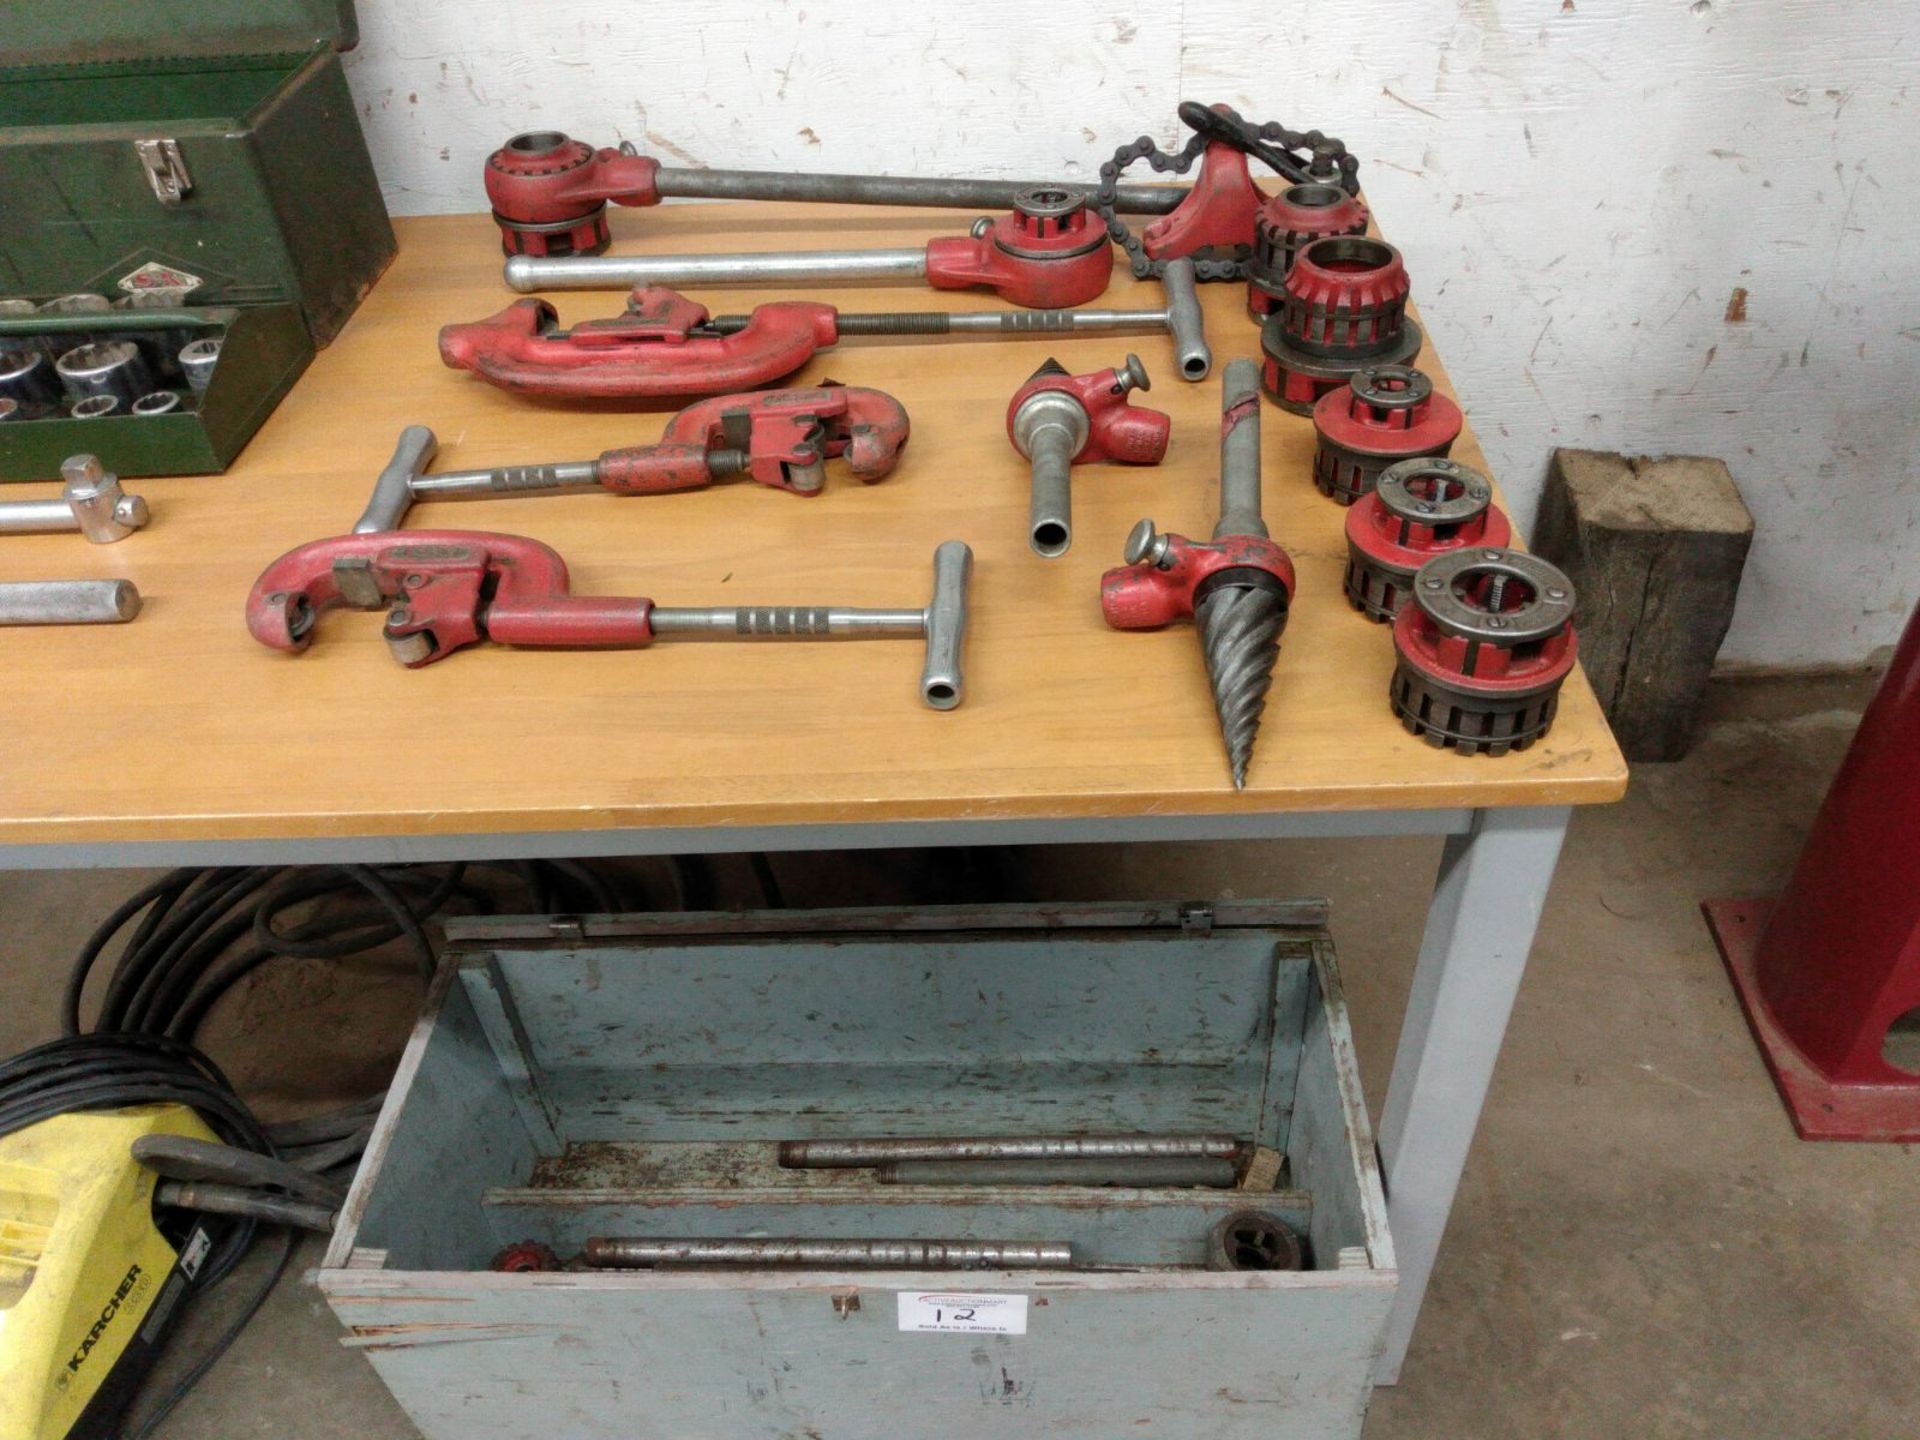 Complete Rigid Set Including Pipe Threaders and Pipe Cutters